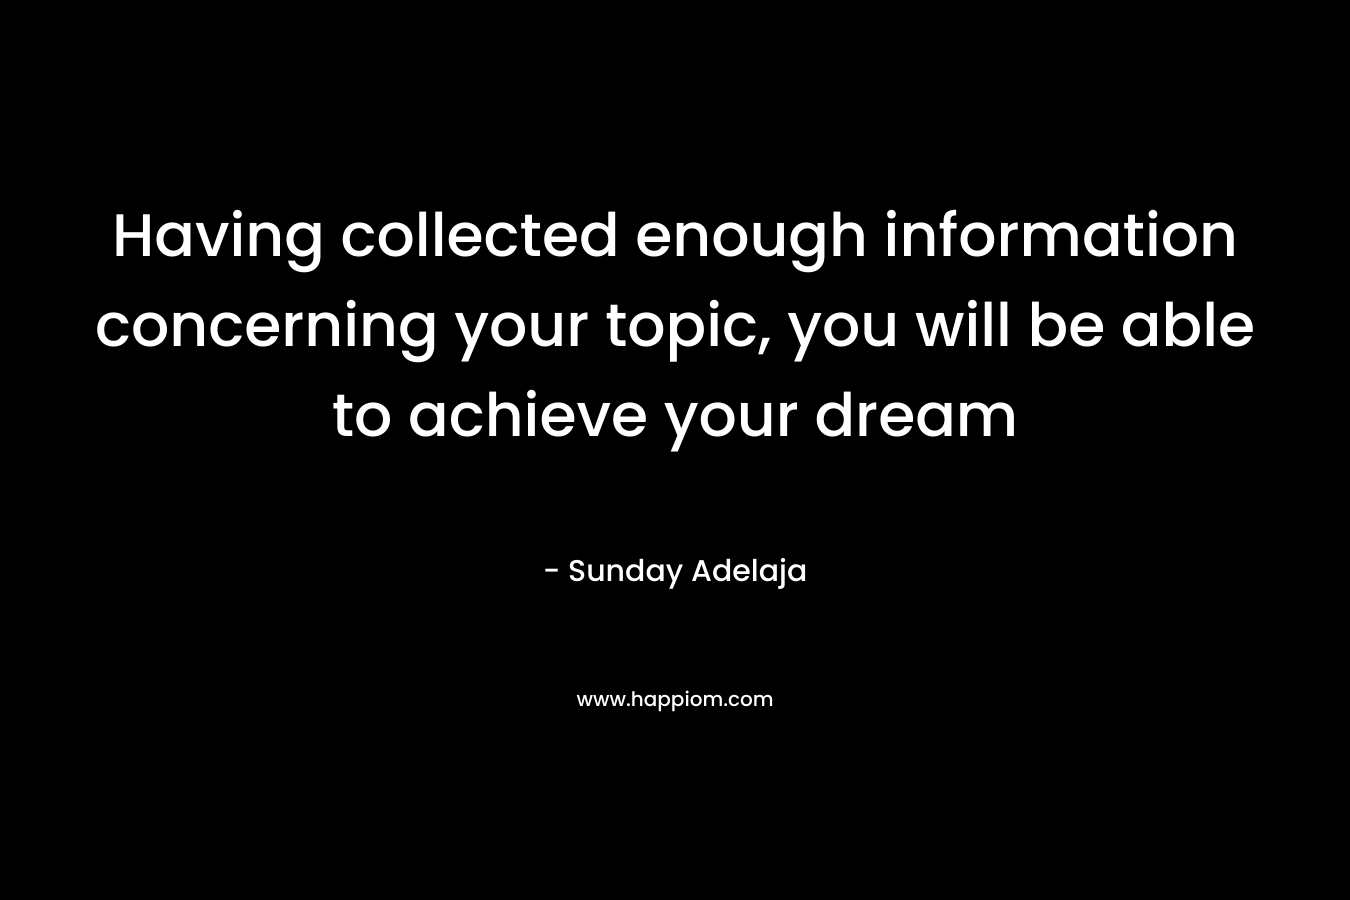 Having collected enough information concerning your topic, you will be able to achieve your dream